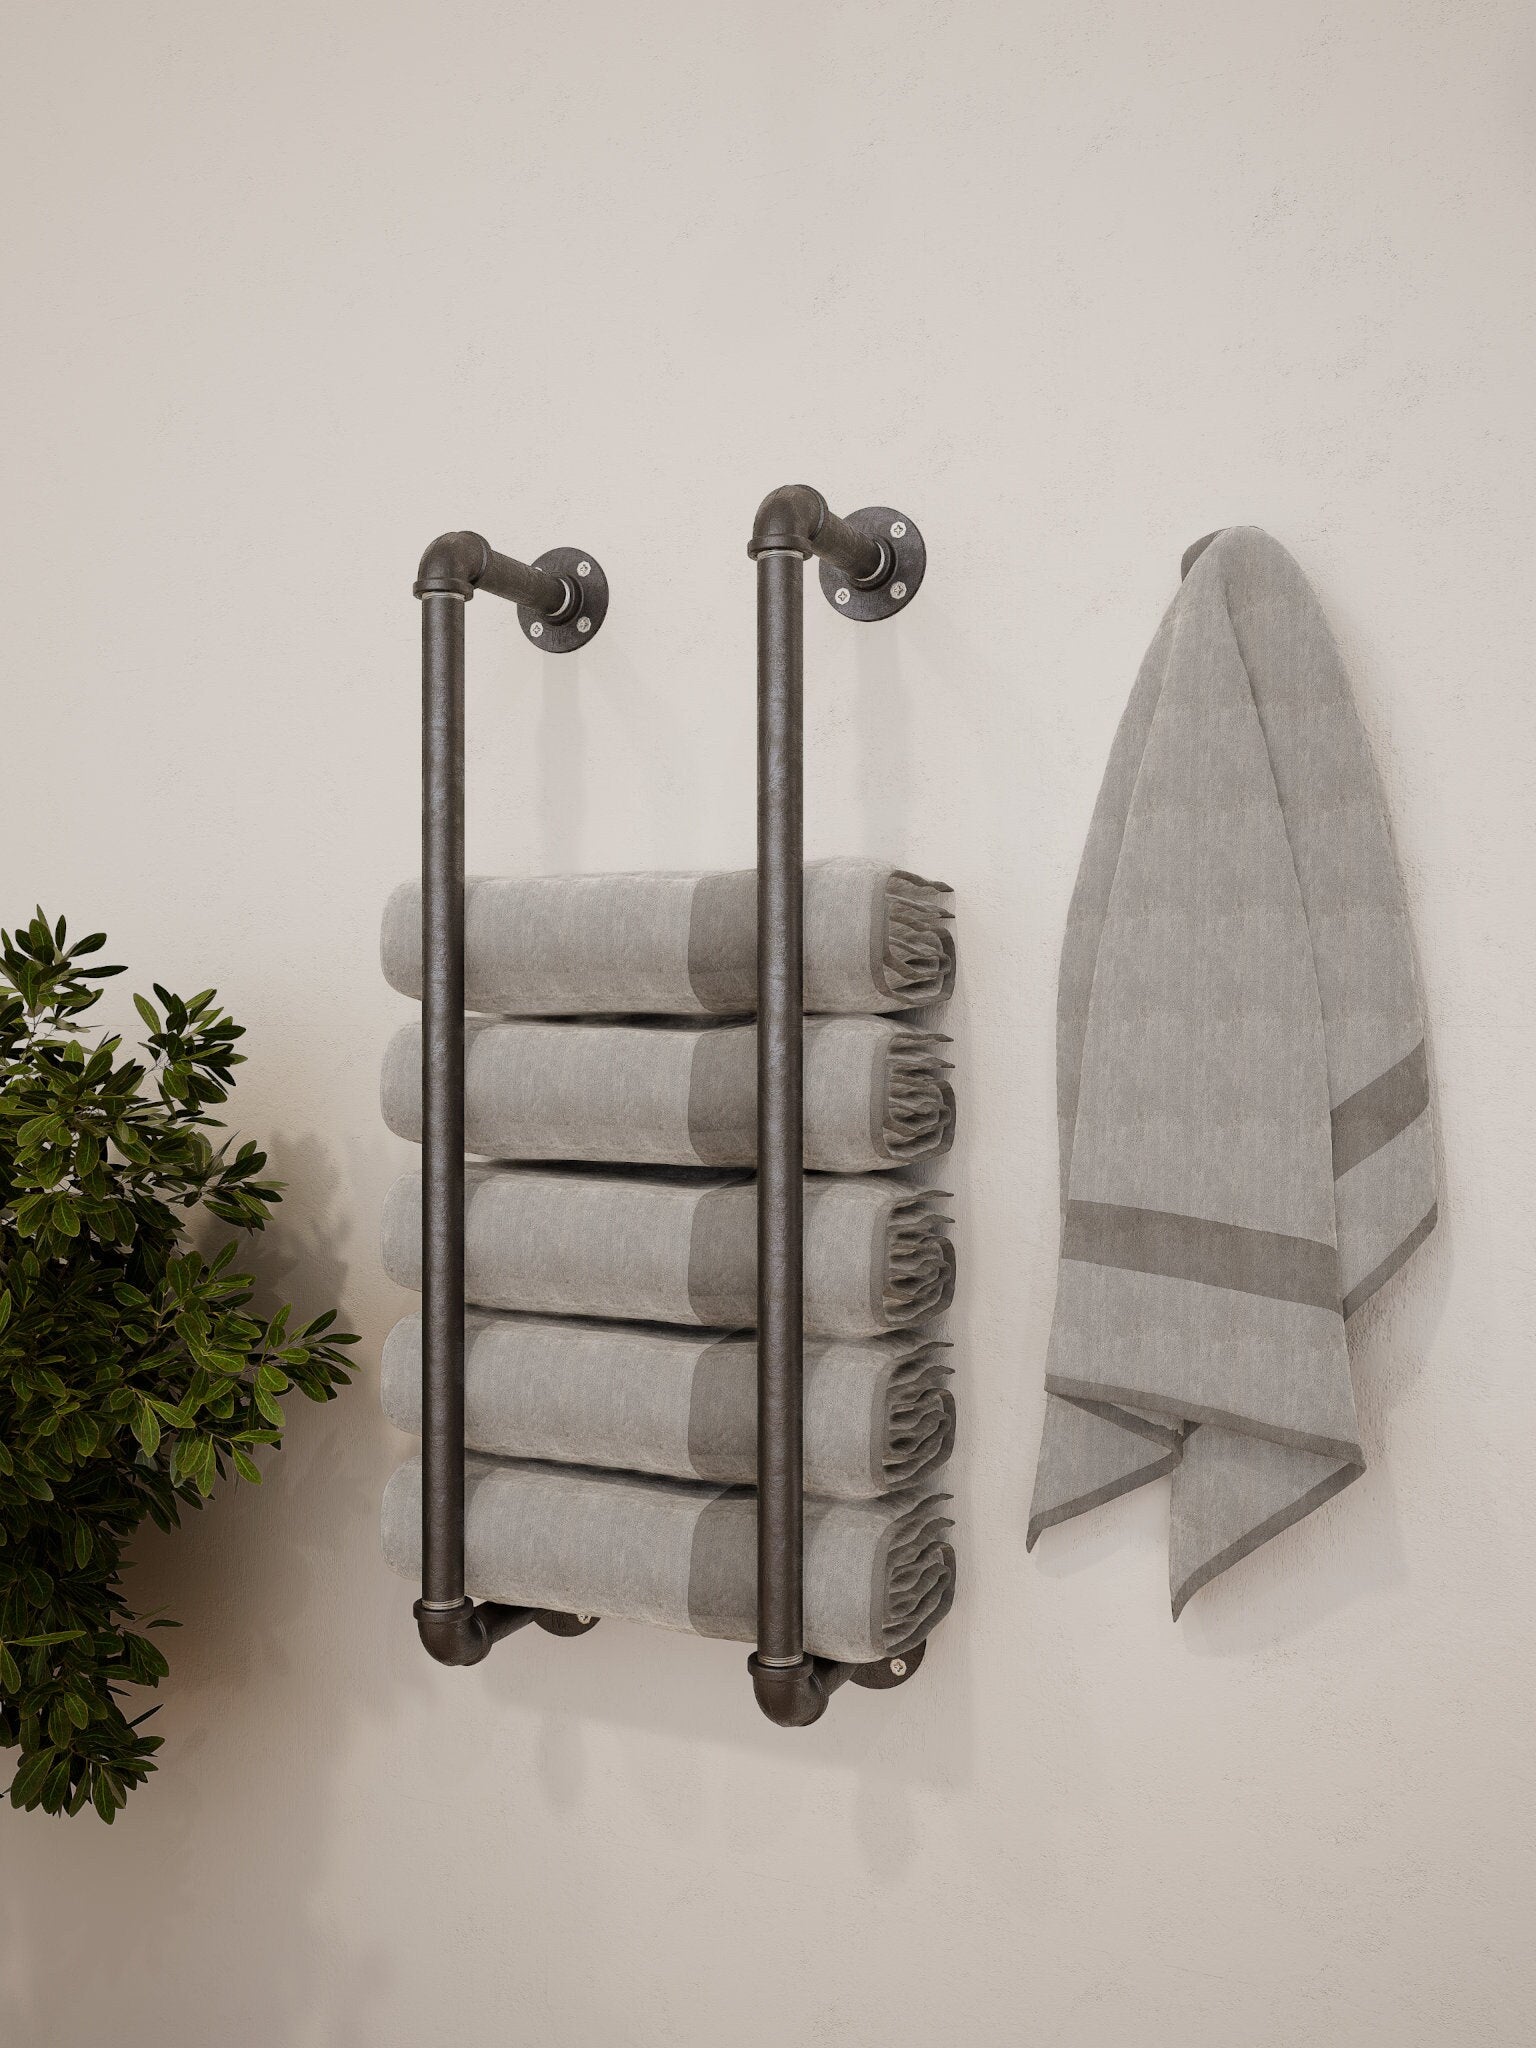 Wall Mounted Towel Holder Rack filled with towels, showcasing its versatile and space-saving design.